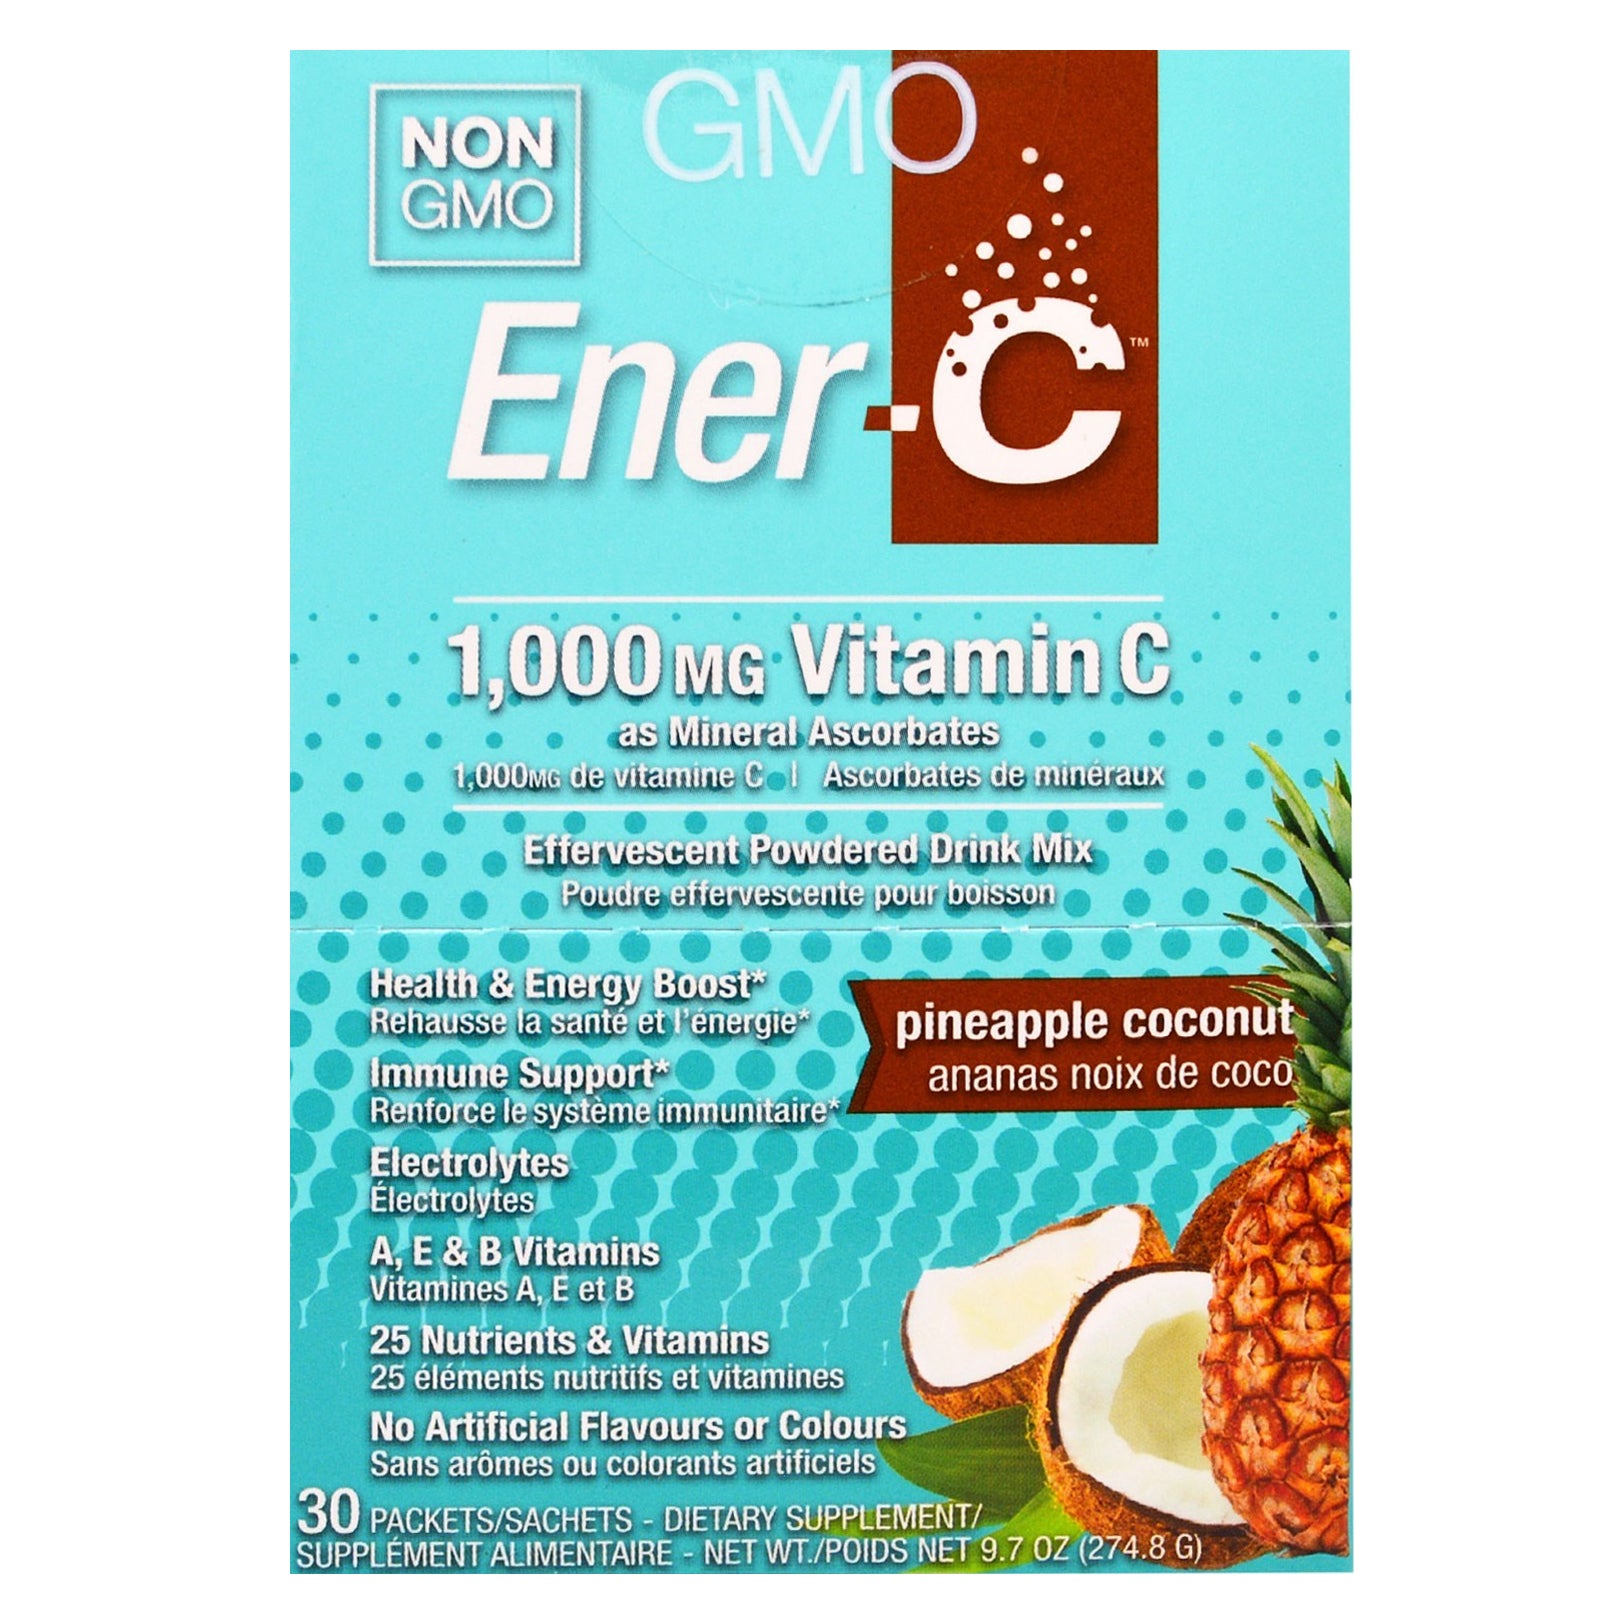 Ener-C, Vitamin C, Effervescent Powdered Drink Mix, Pineapple Coconut, 30 Packets, 9.7 oz (274.8 g)